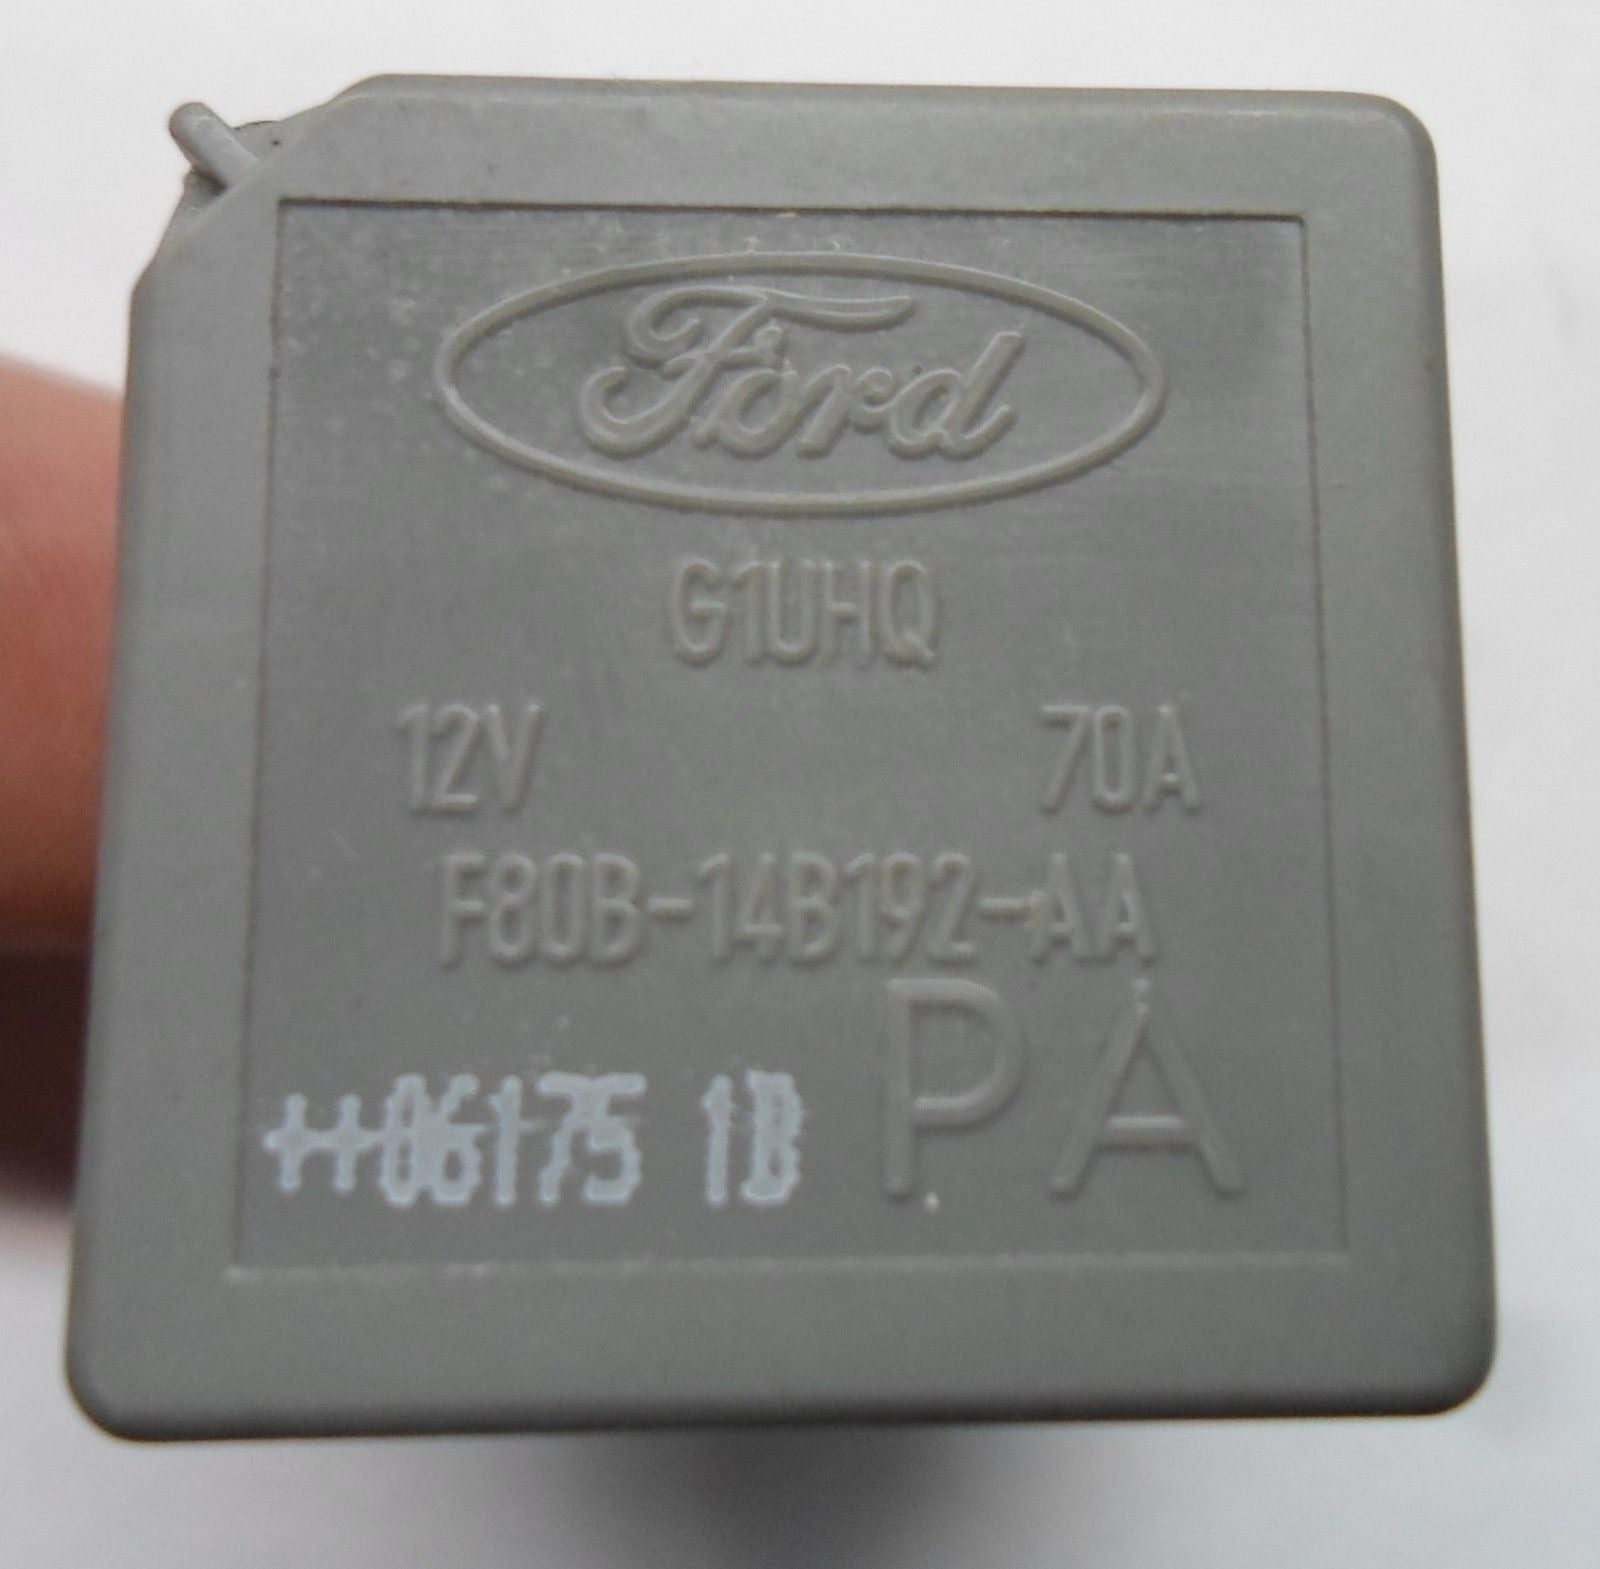 FORD OEM RELAY F80B-14B192-AA  G1UHQ  TESTED FREE SHIPPING 6 MONTH WARRANTY  F3